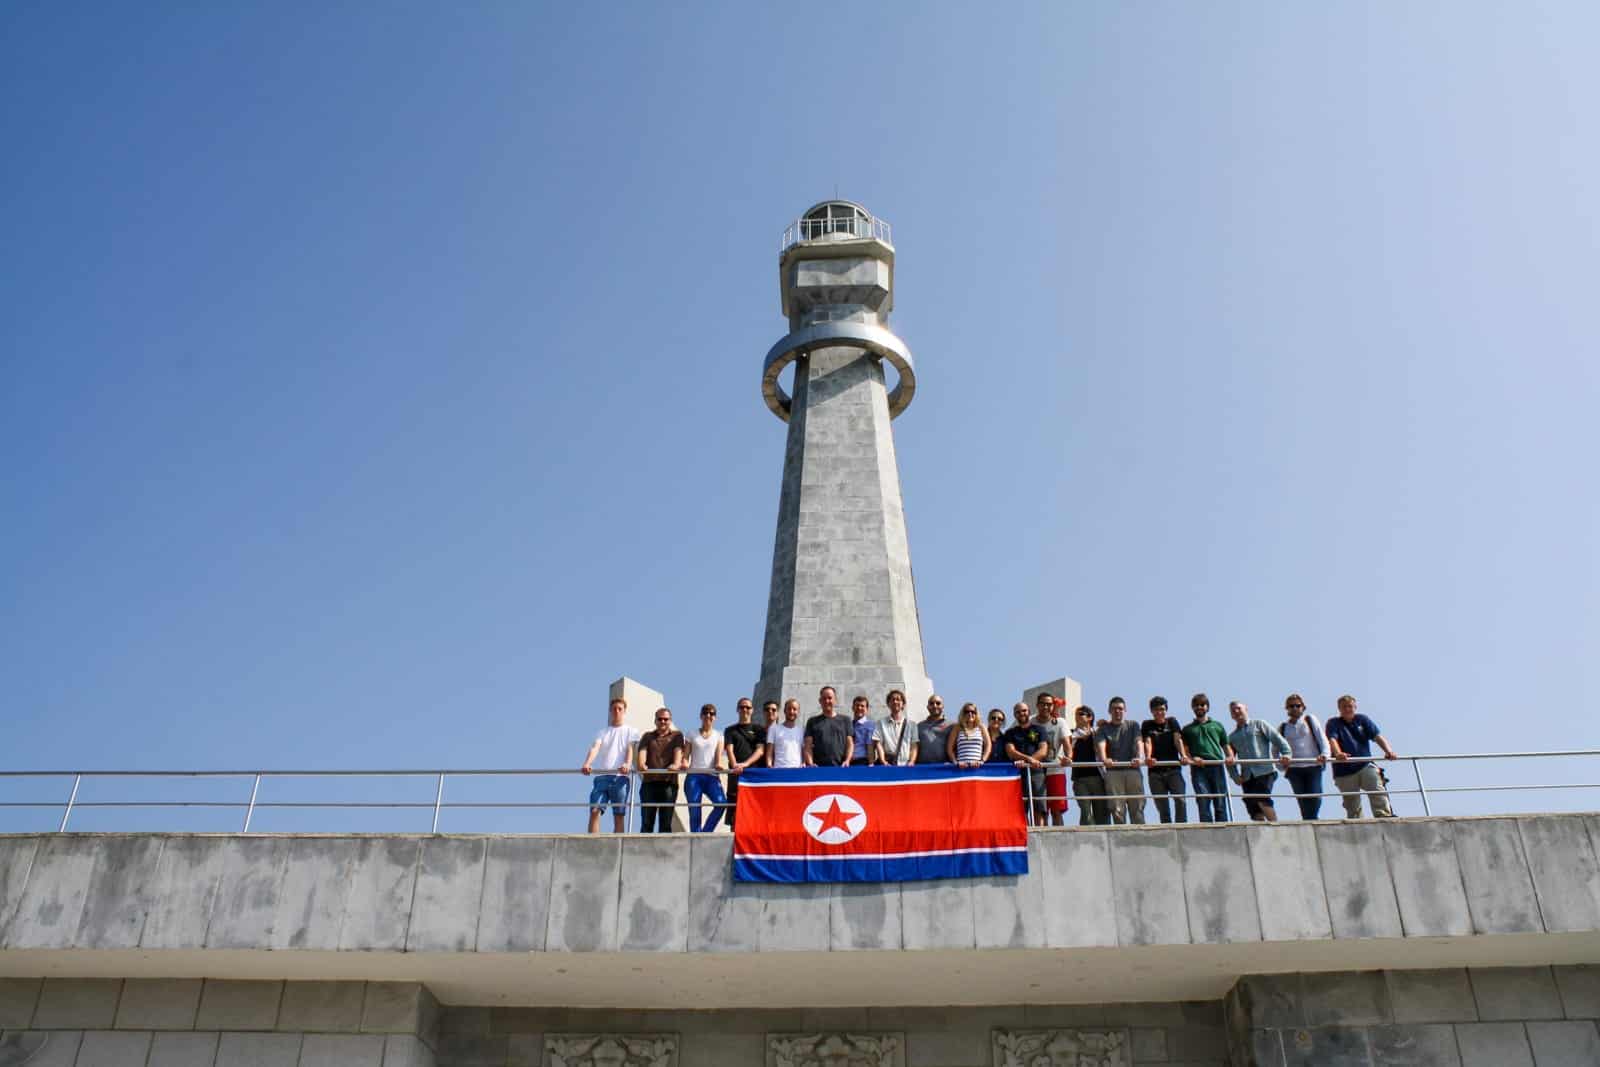 A Koryo Tours group travels to North Korea and visits a monument in Pyongyang